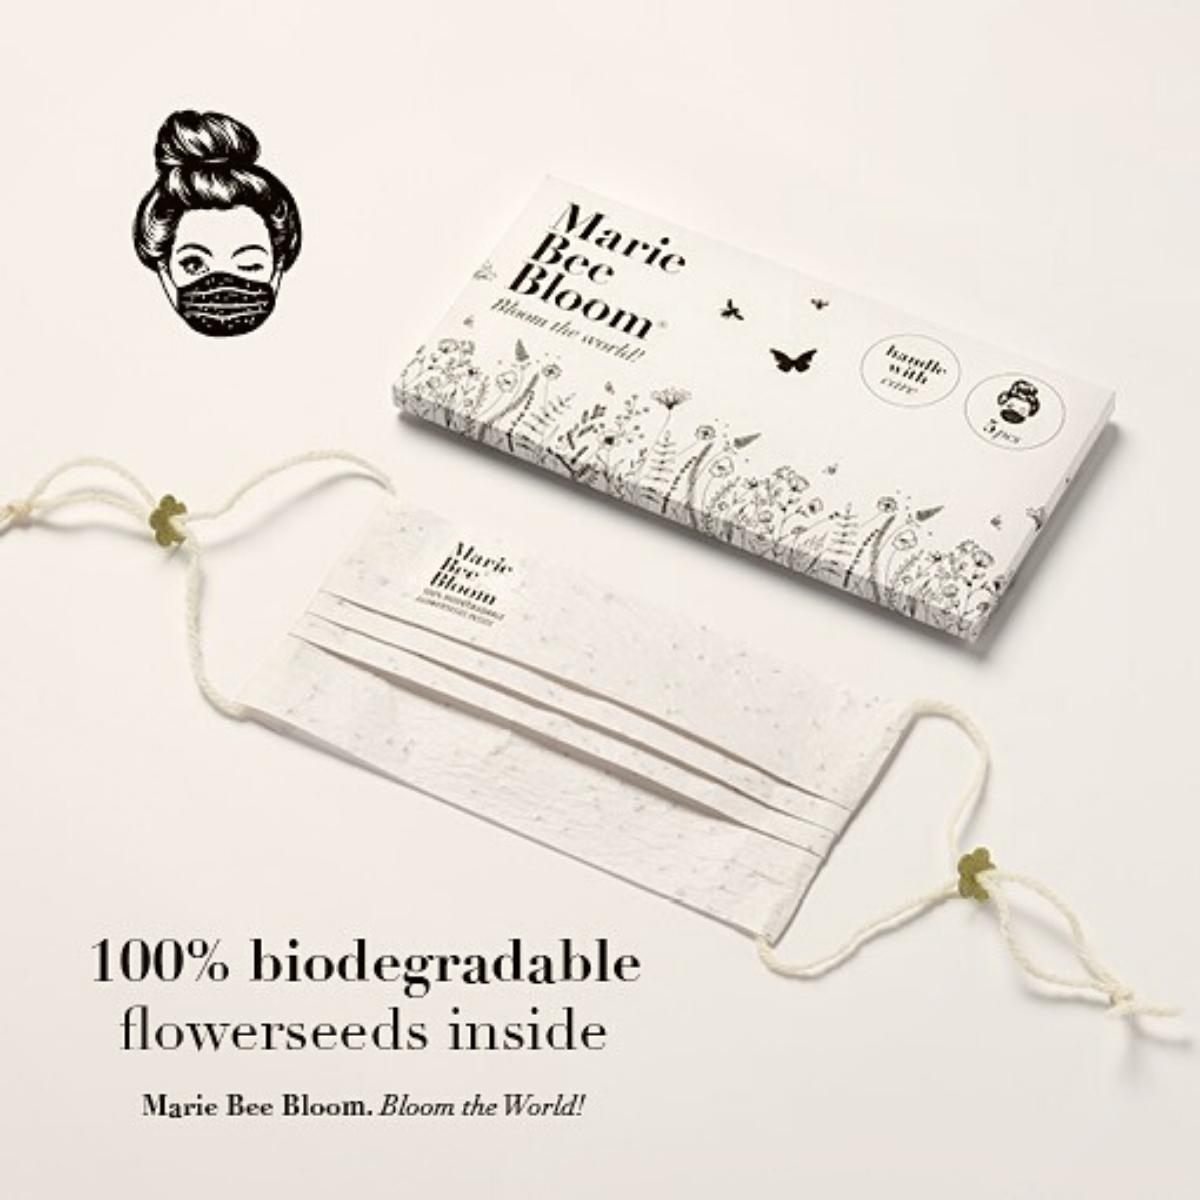 marie-bee-bloom-biodegradable-face-masks-featured